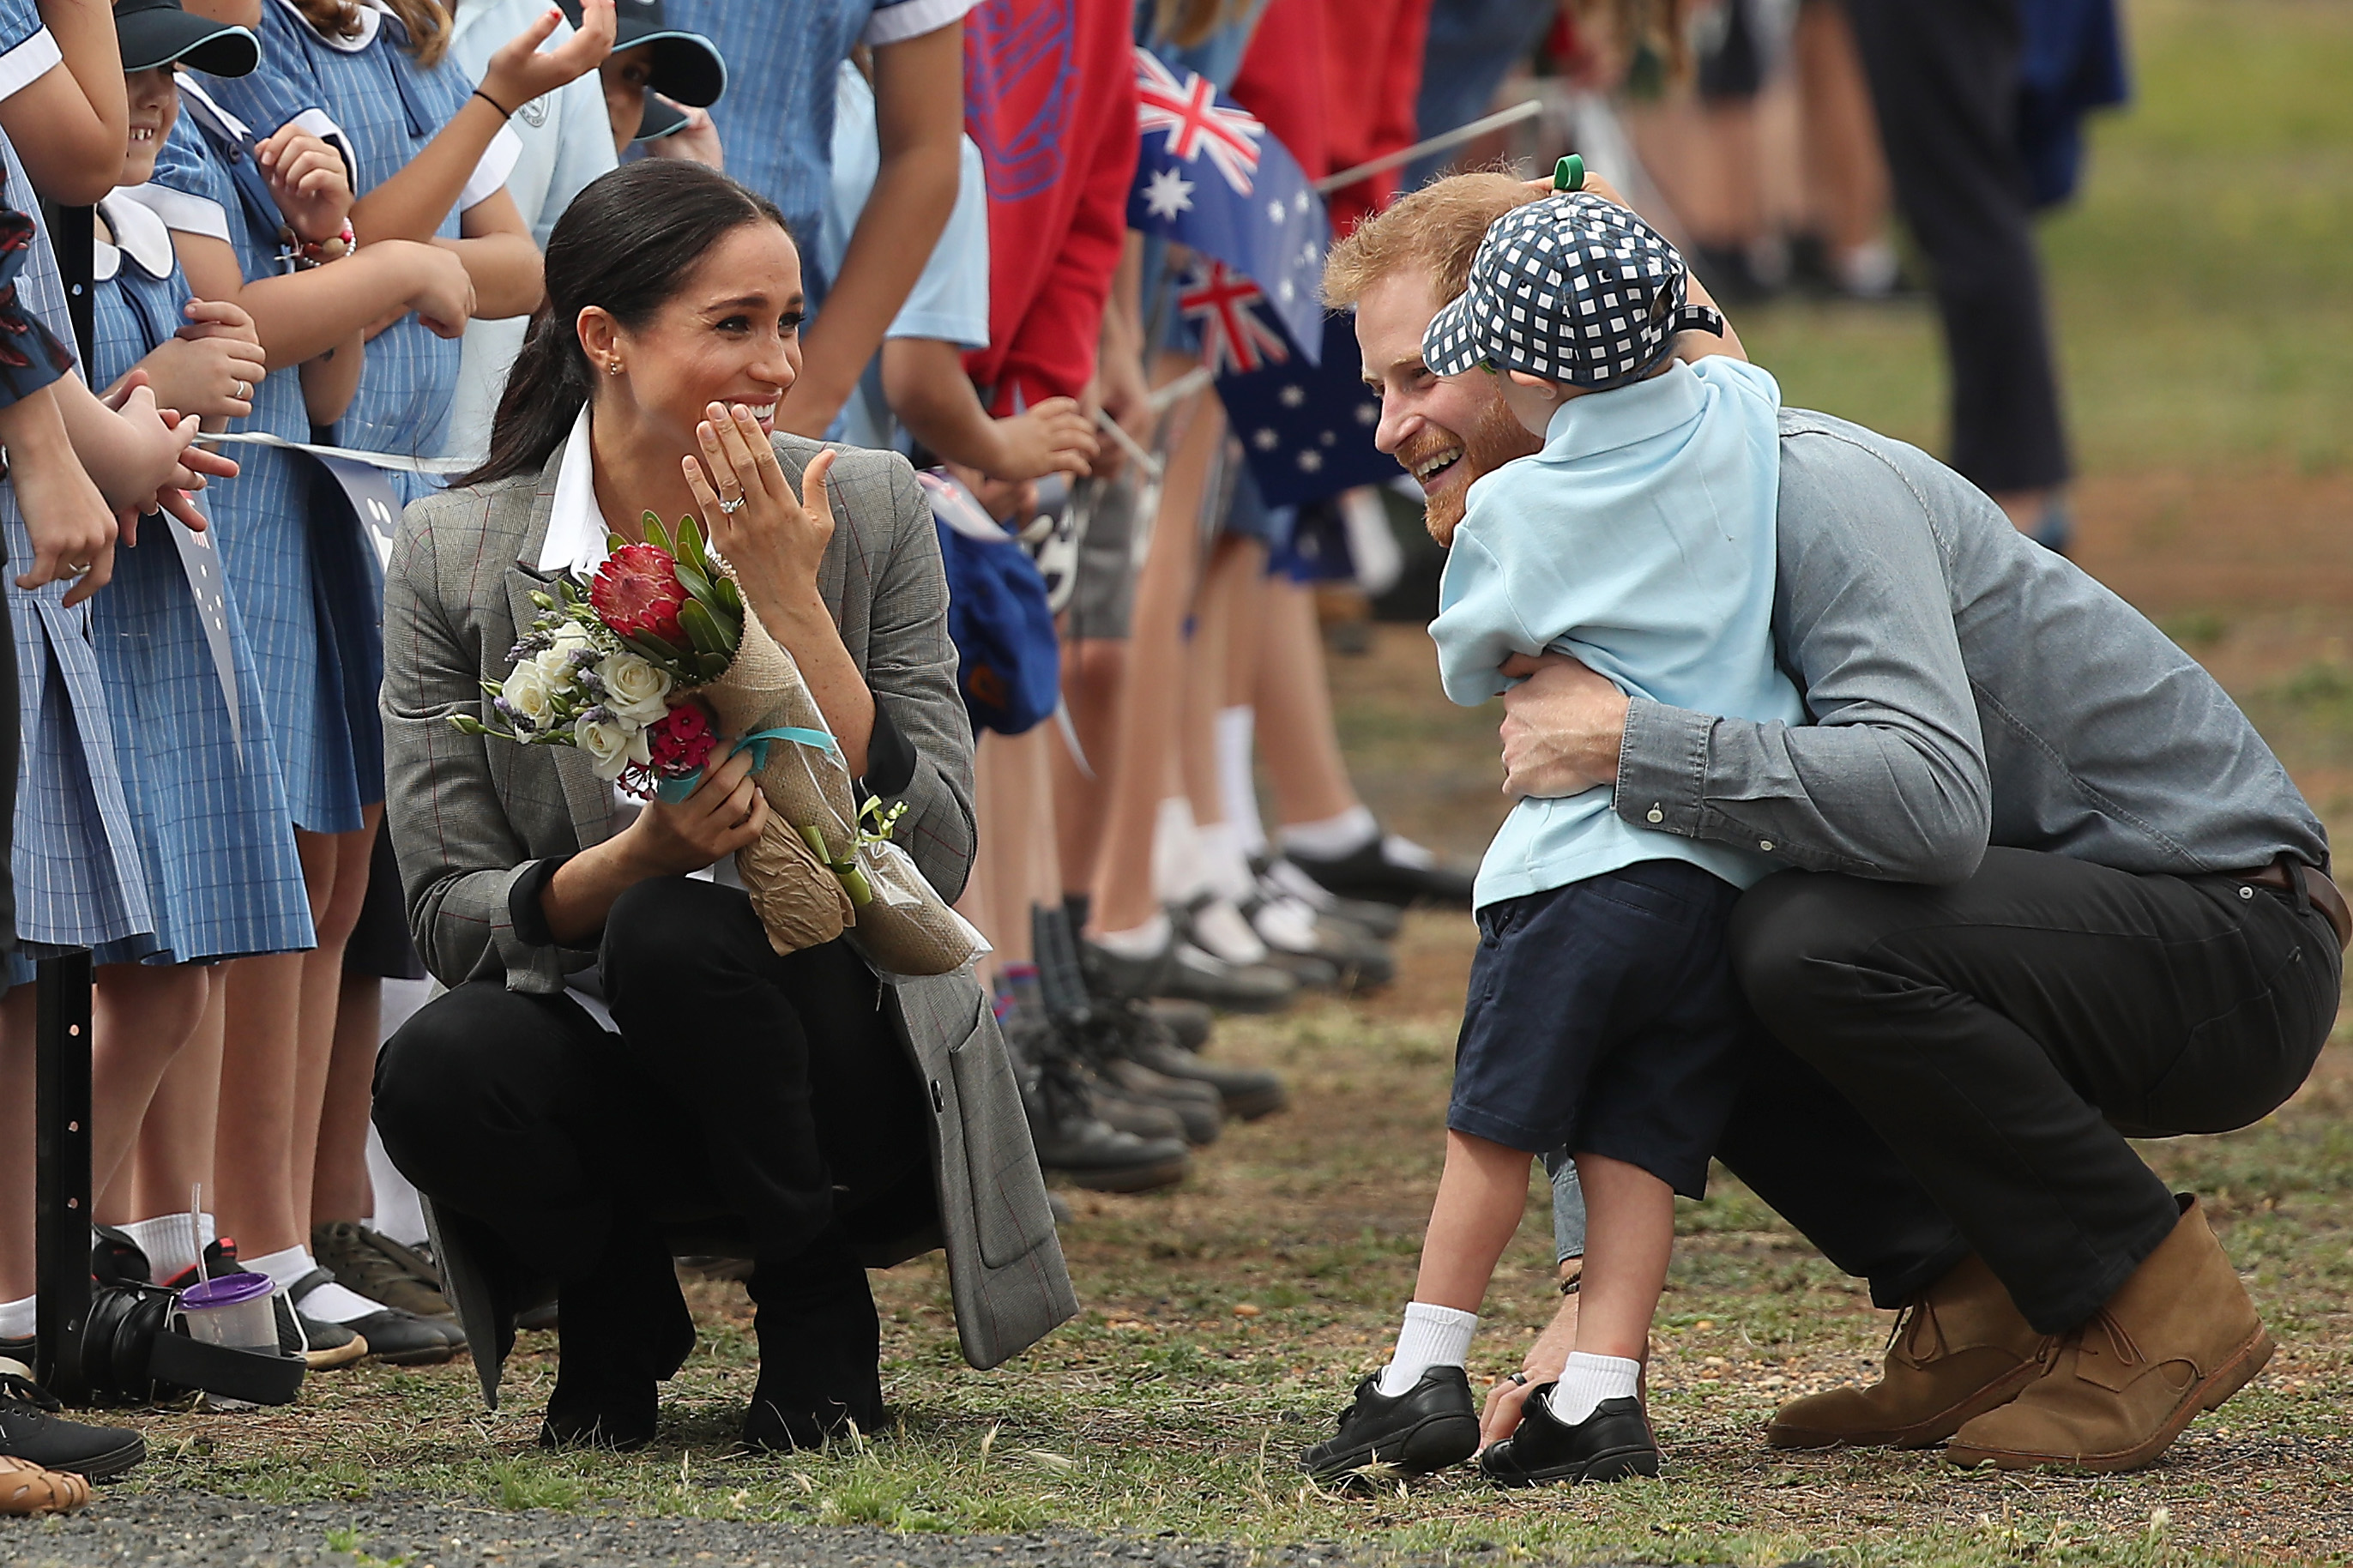 Prince Harry and Meghan Markle meet with local children as they arrive at Dubbo Airport on October 17, 2018 in Dubbo, Australia | Source: Getty Images